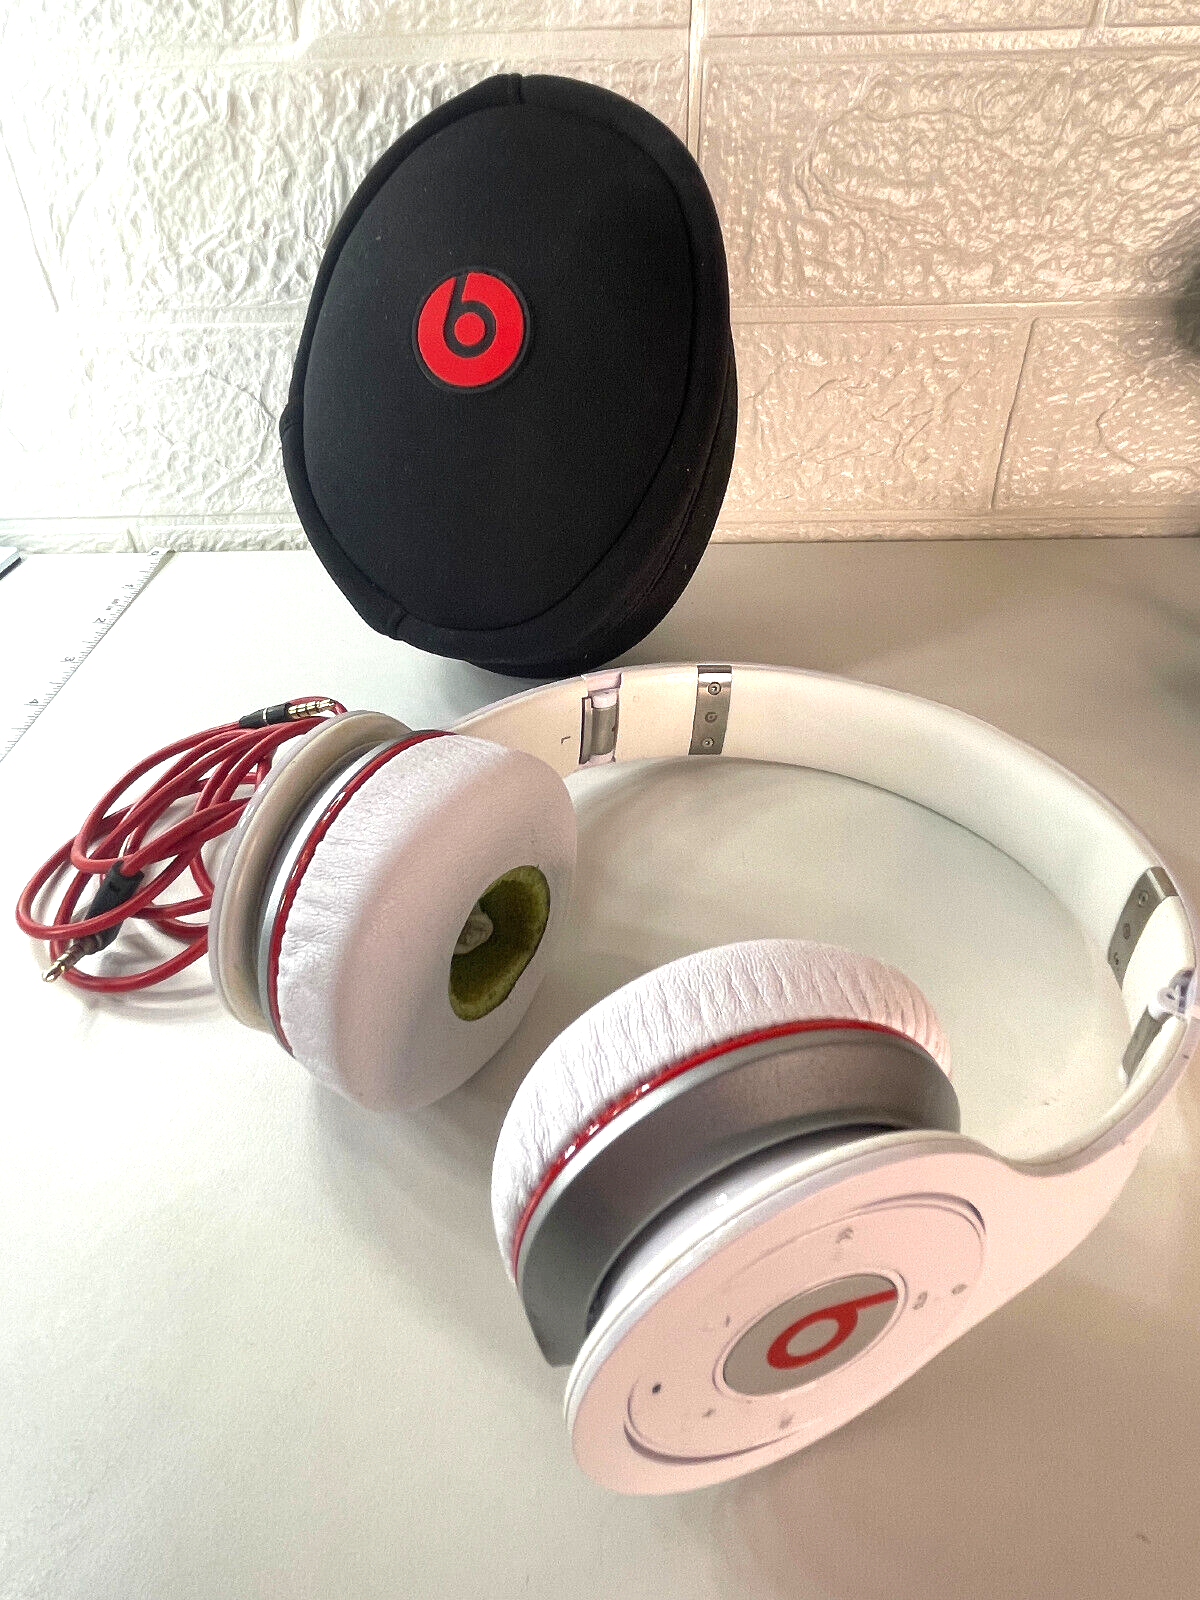 Primary image for Beats Studio (1st Generation) Wired Headphones with Case - White